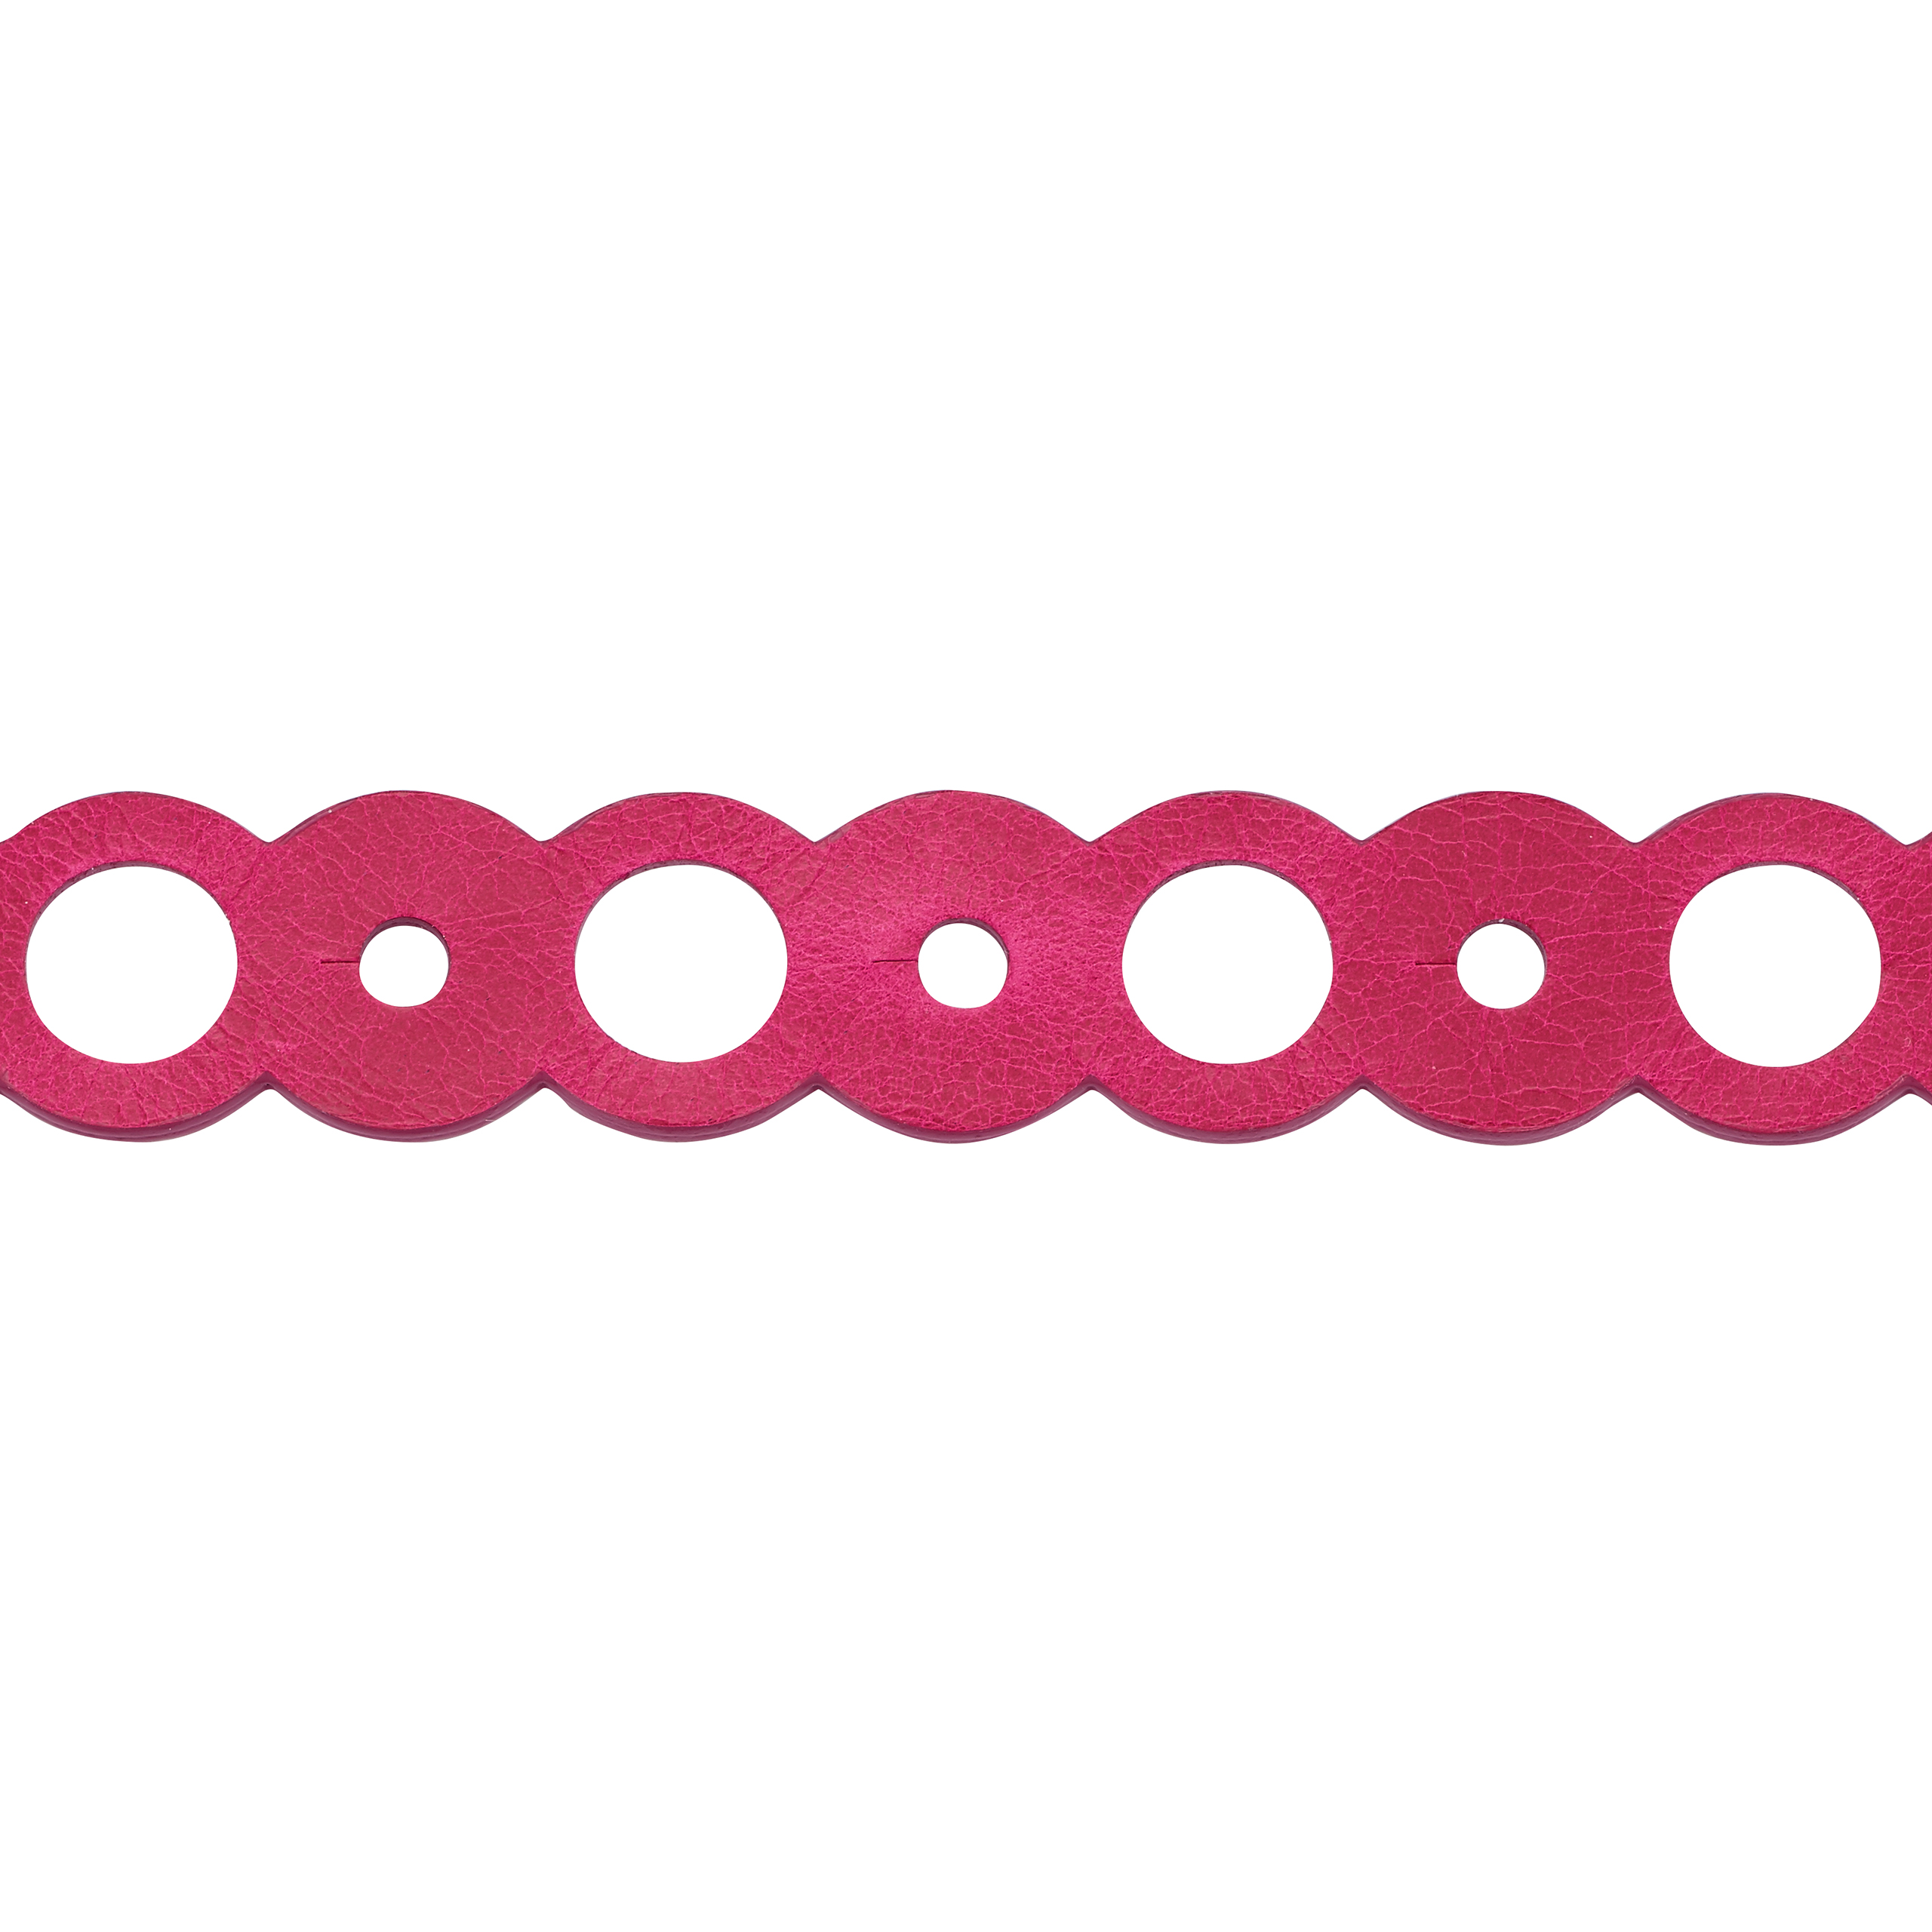 Bracelet, without clasp - Pin